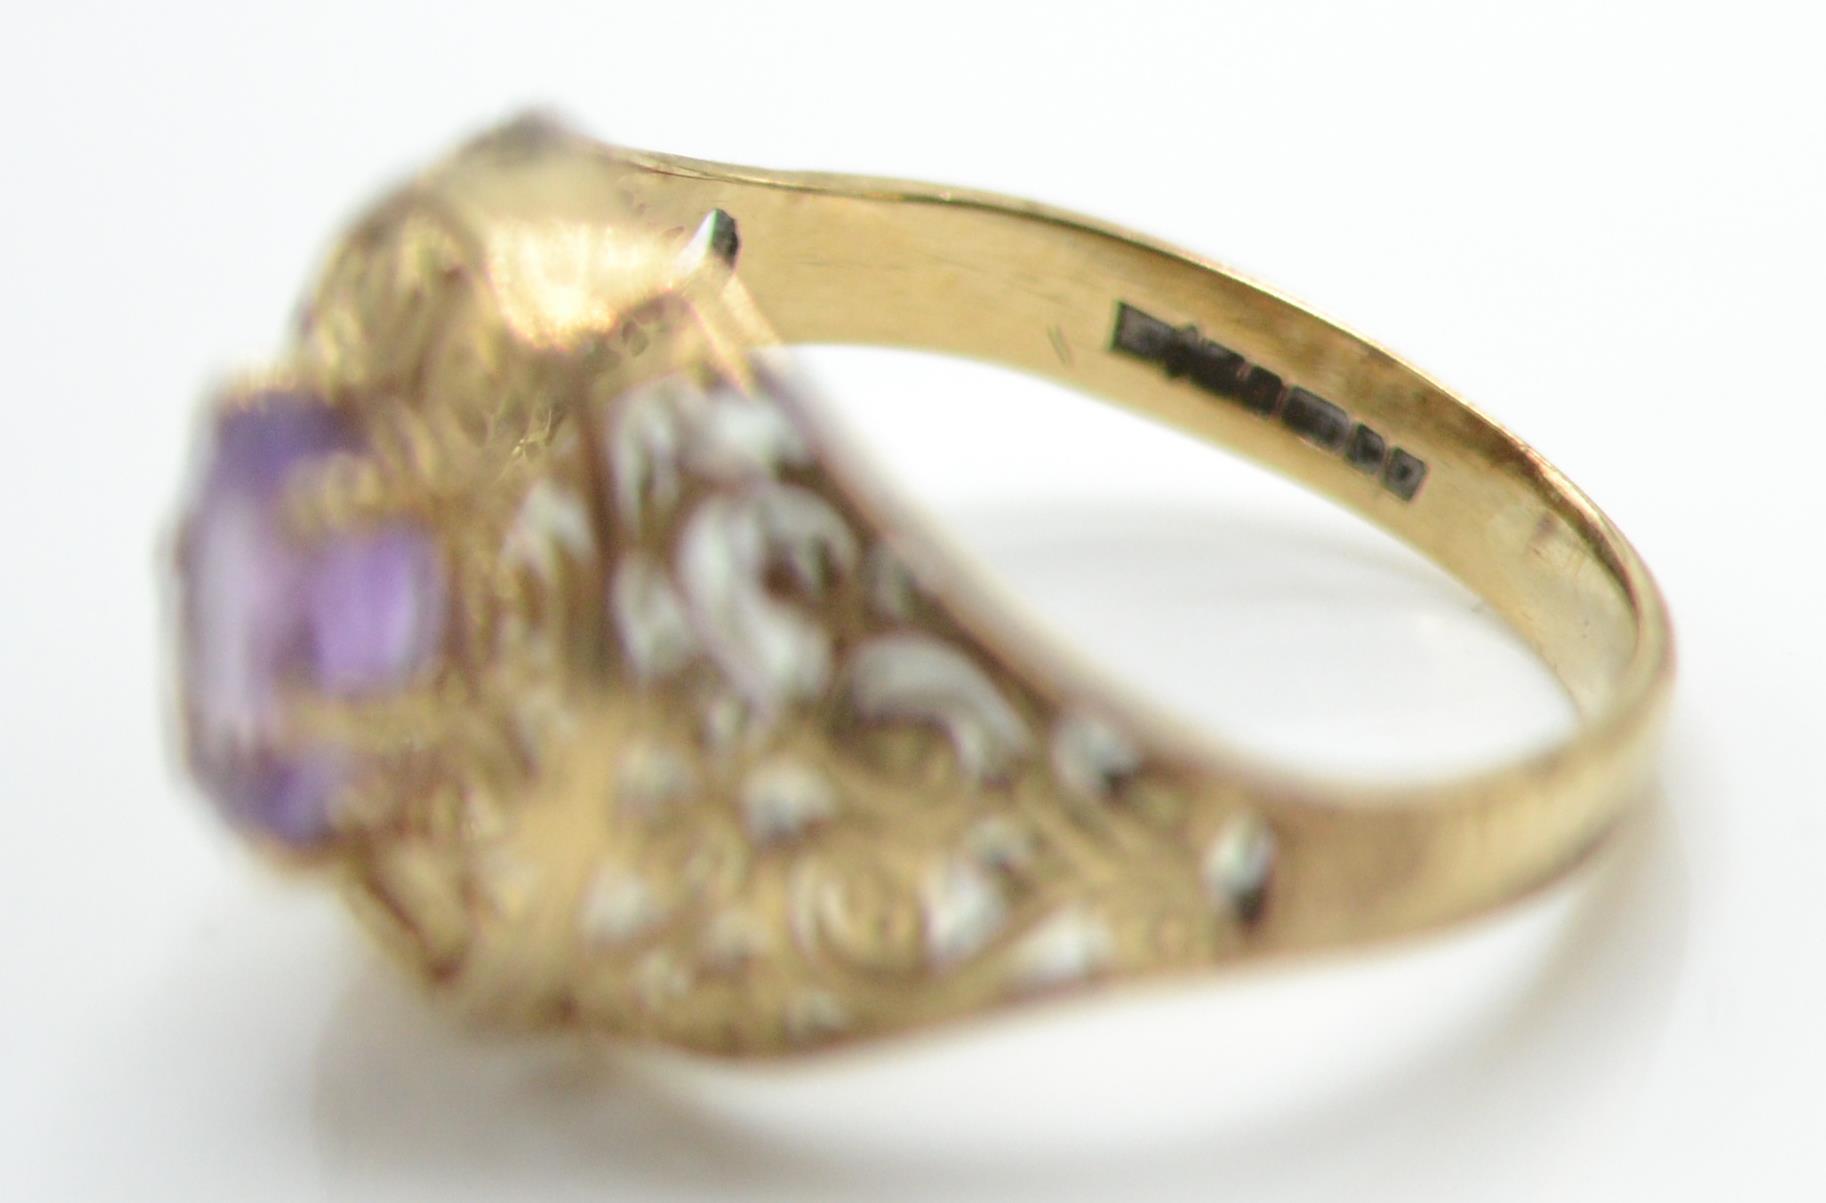 2 hallmarked 9ct gold and gem set rings. One having a gem set cluster, the other having an - Image 13 of 14